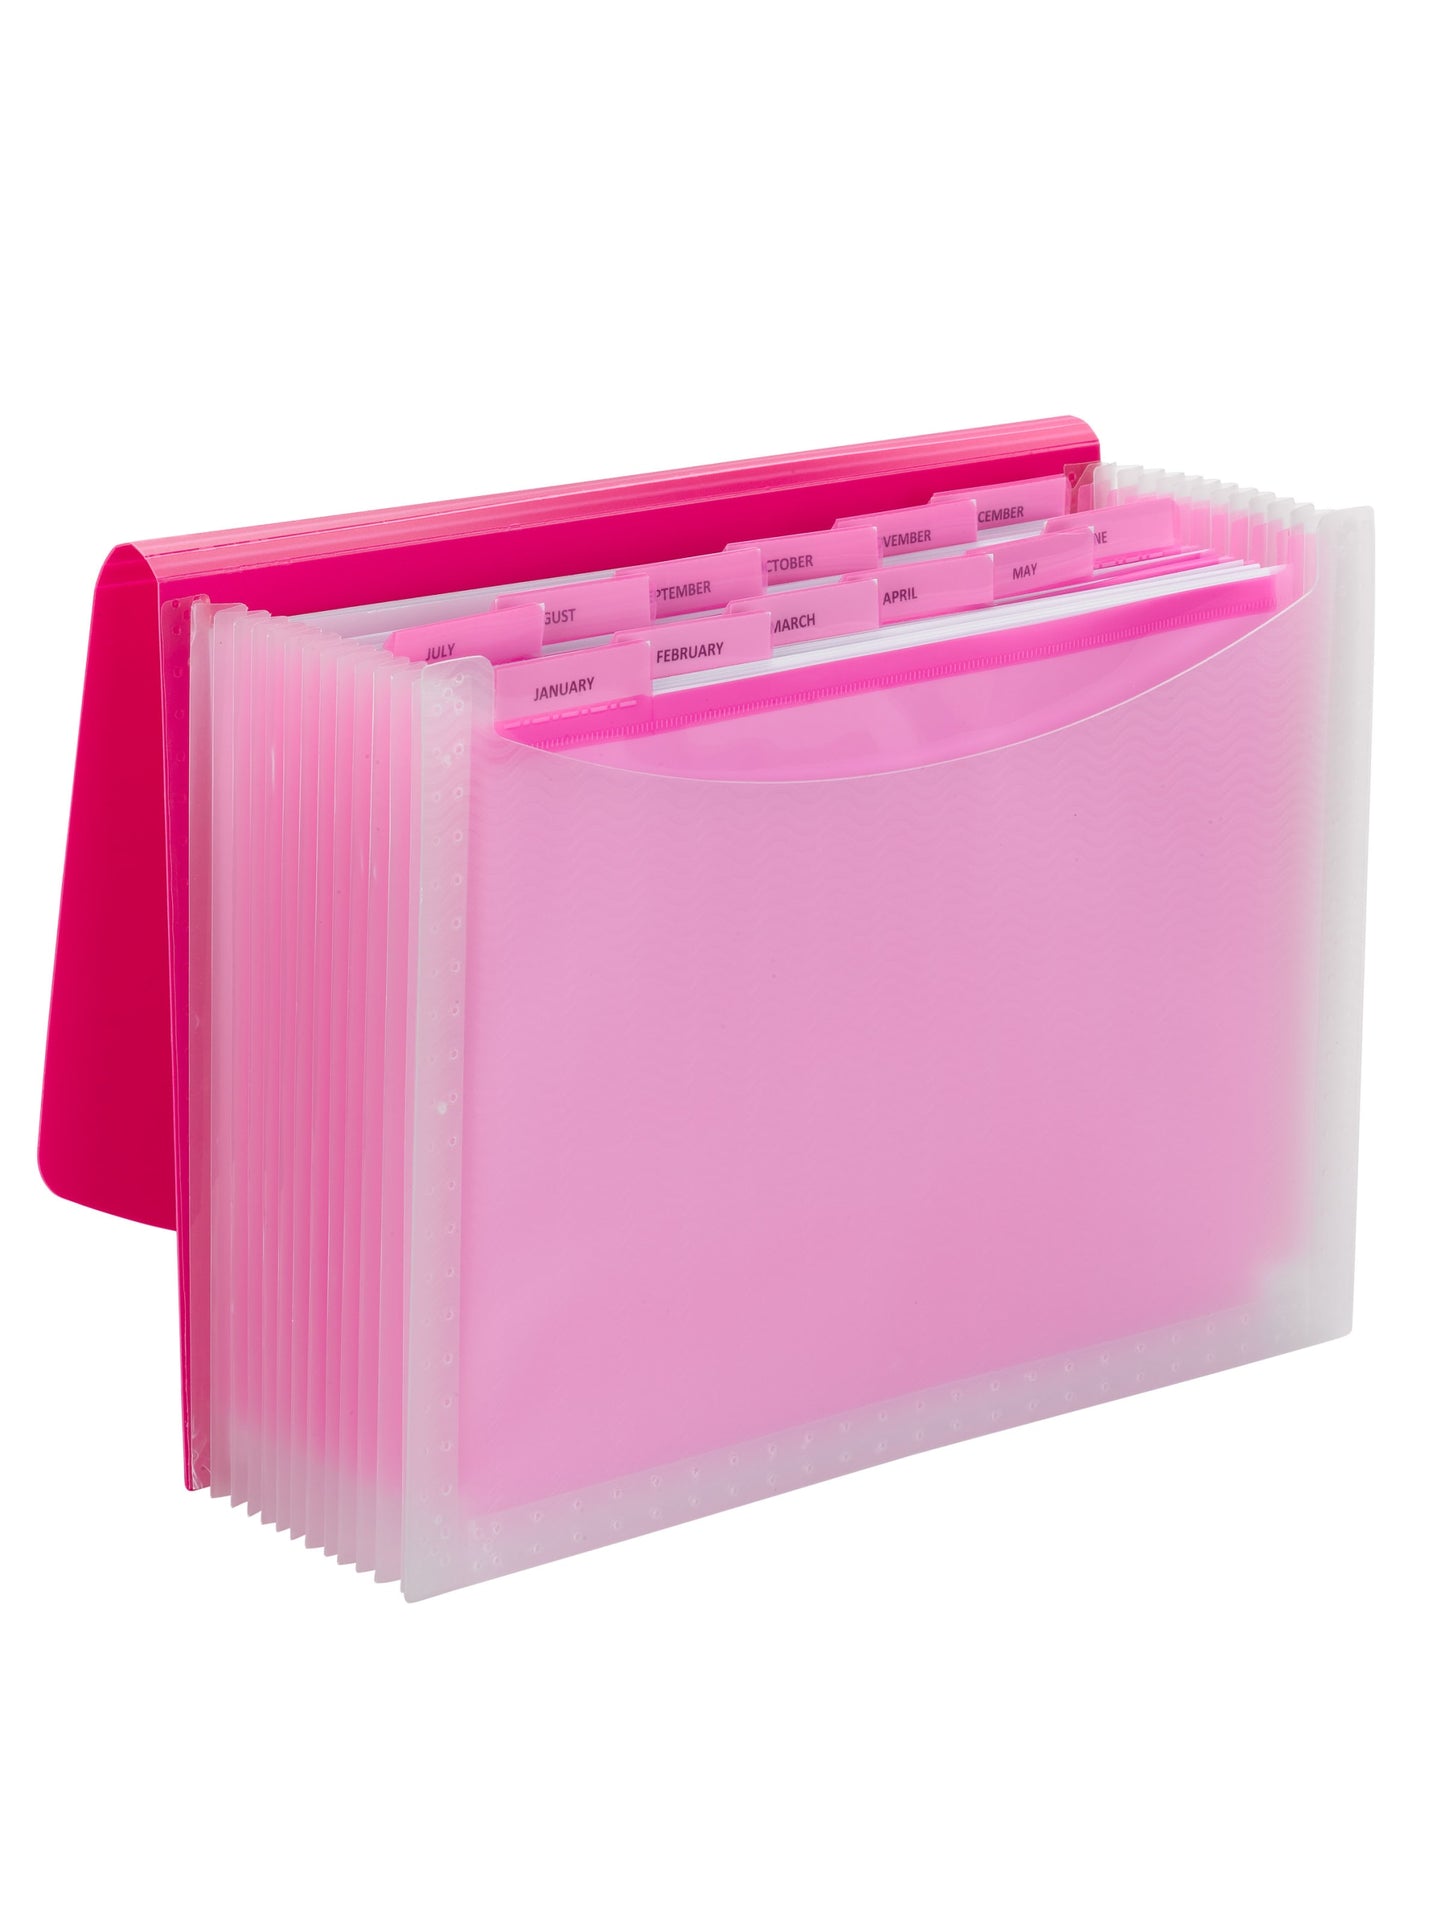 Poly Expanding Files with Flap, 12 Pockets, Wave Pattern, Pink Color, Letter Size, Set of 1, 086486708647